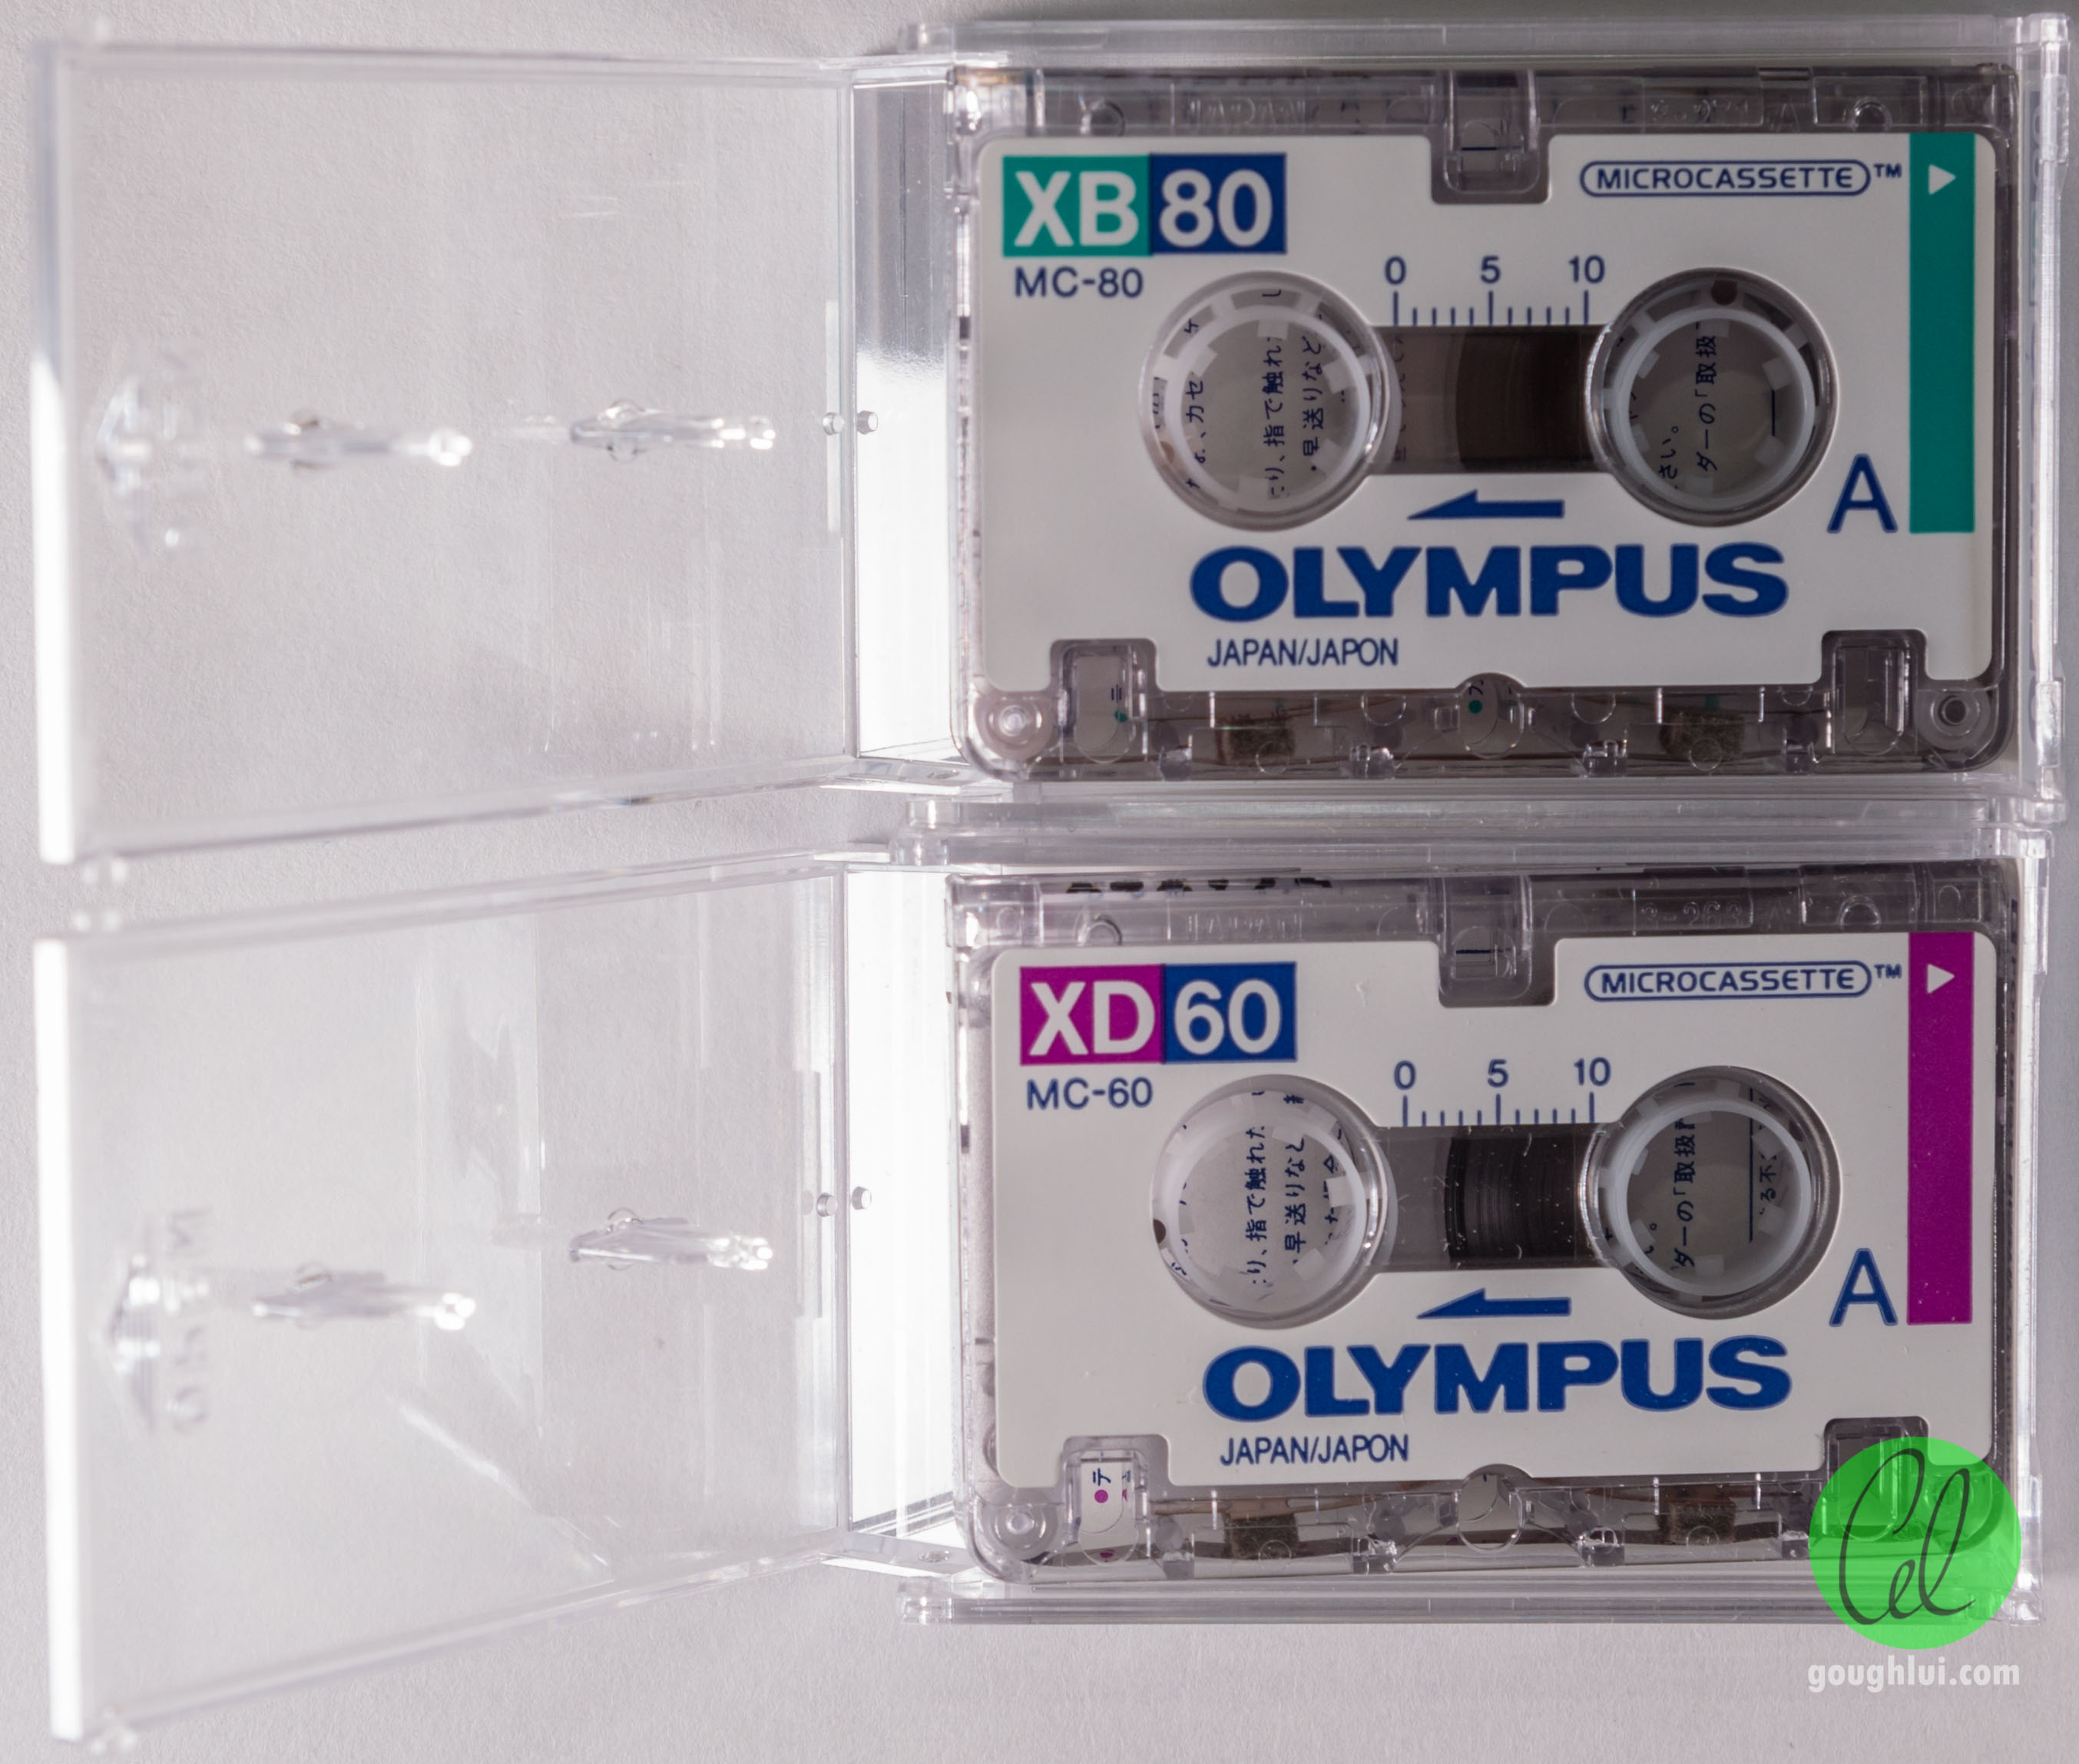 17 Olympus Xd60 Microcassette Micro Cassette Tapes for Dictation for sale online 